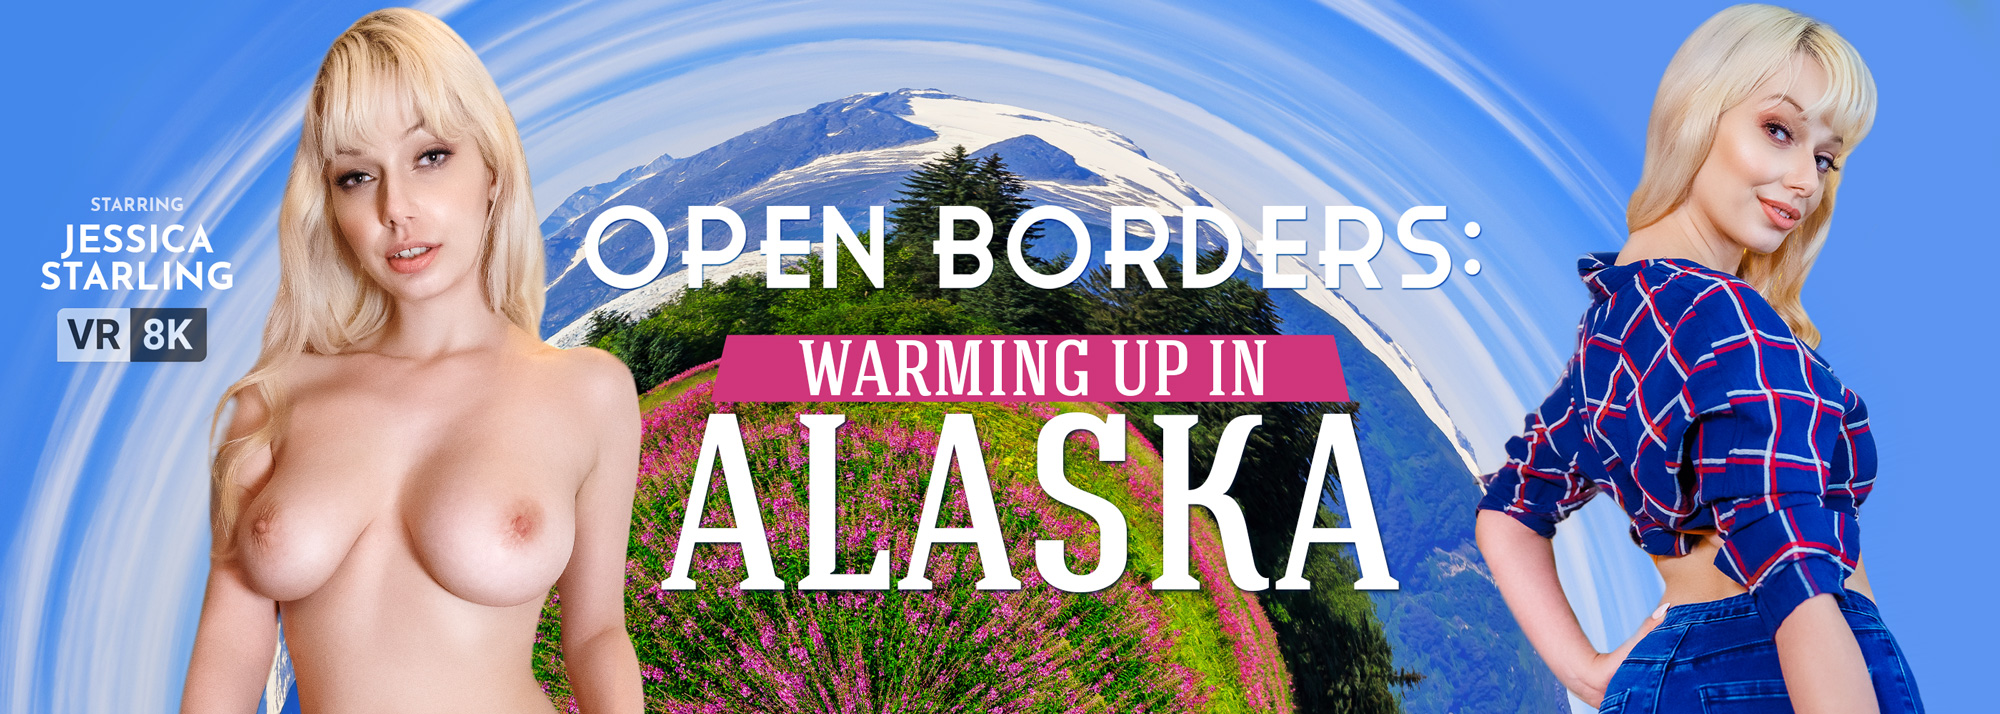 Open Borders: Warming Up In Alaska with Jessica Starling  Slideshow